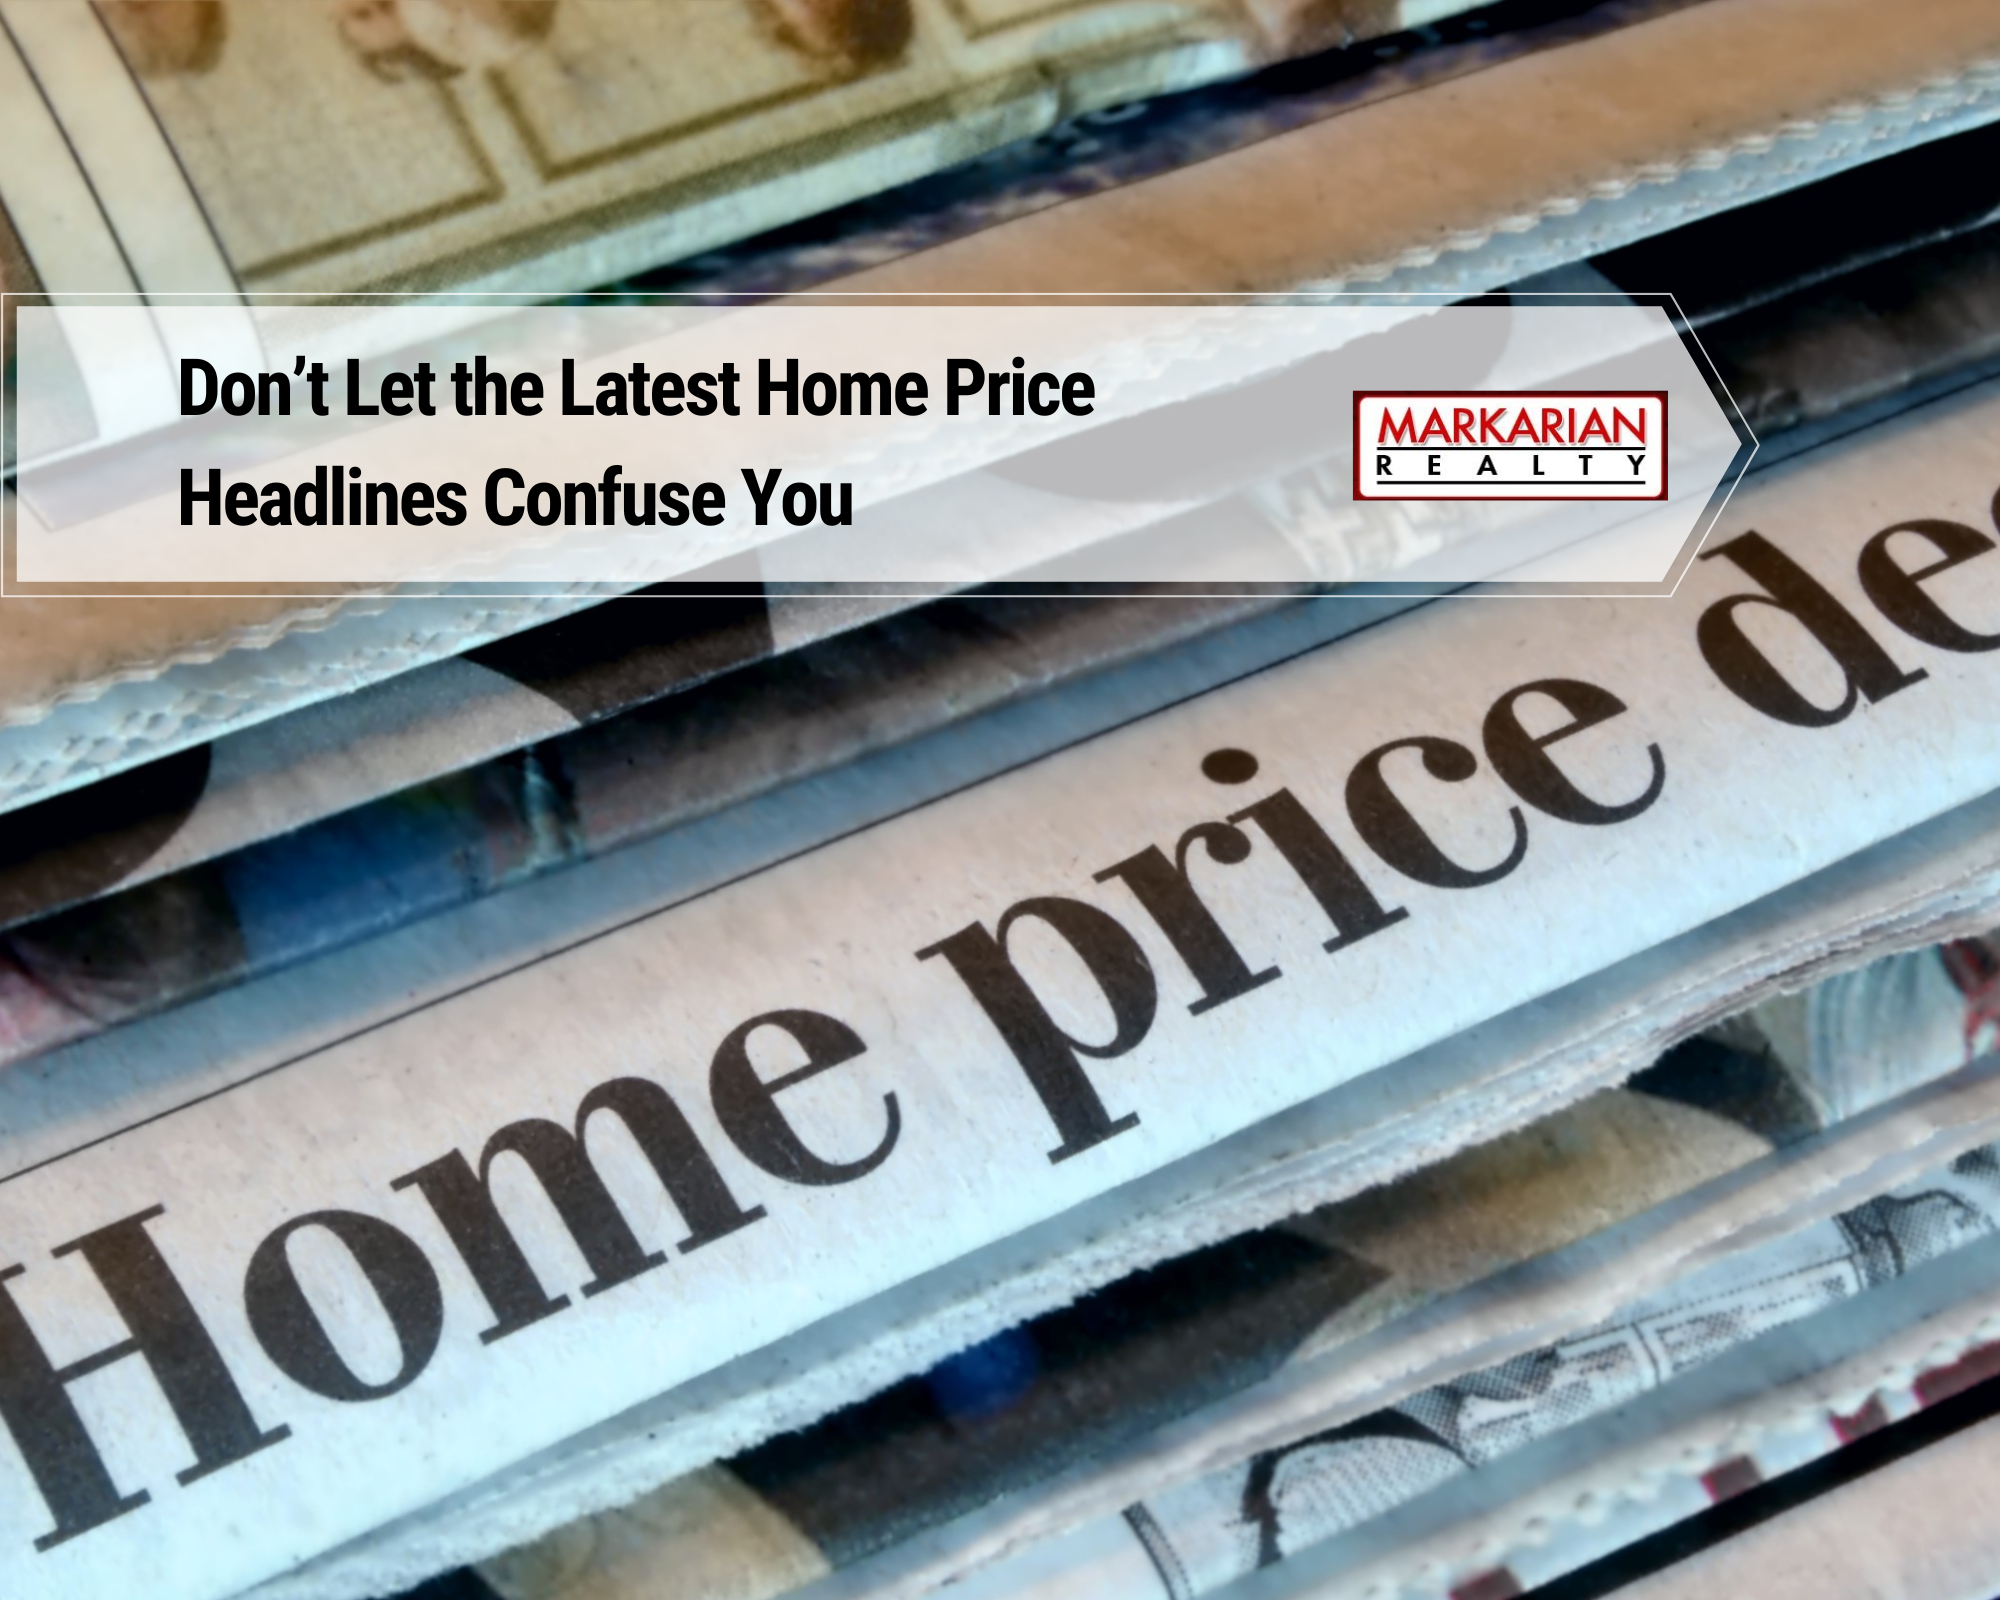 Don’t Let the Latest Home Price Headlines Confuse You